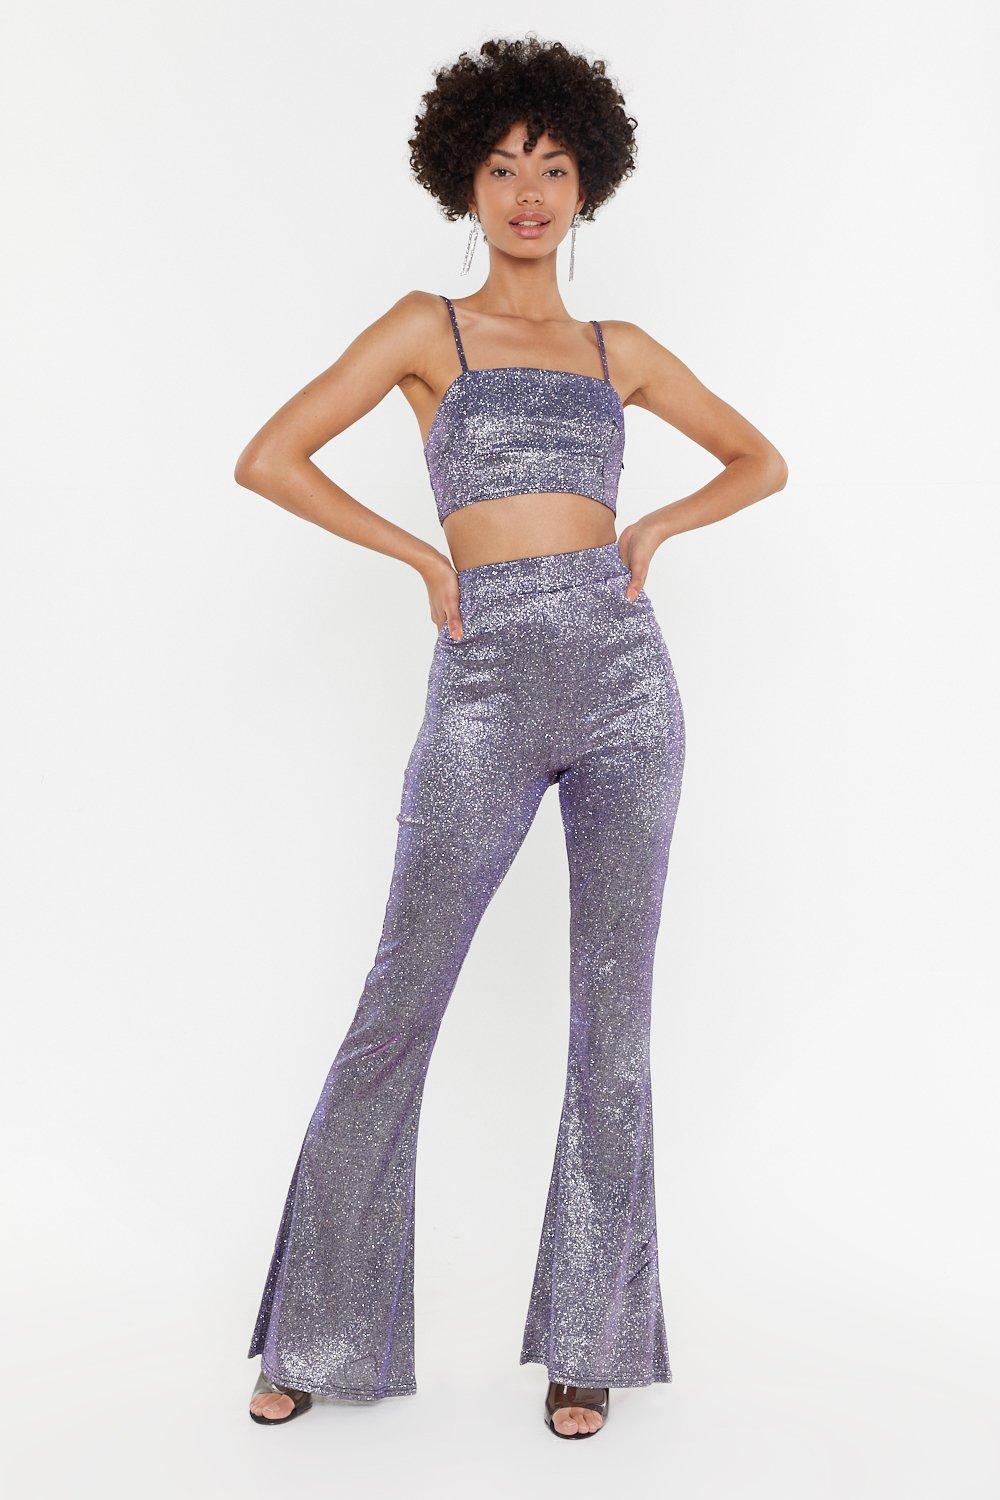 Let's Groove Glitter Crop Top and Pants Set | Nasty Gal